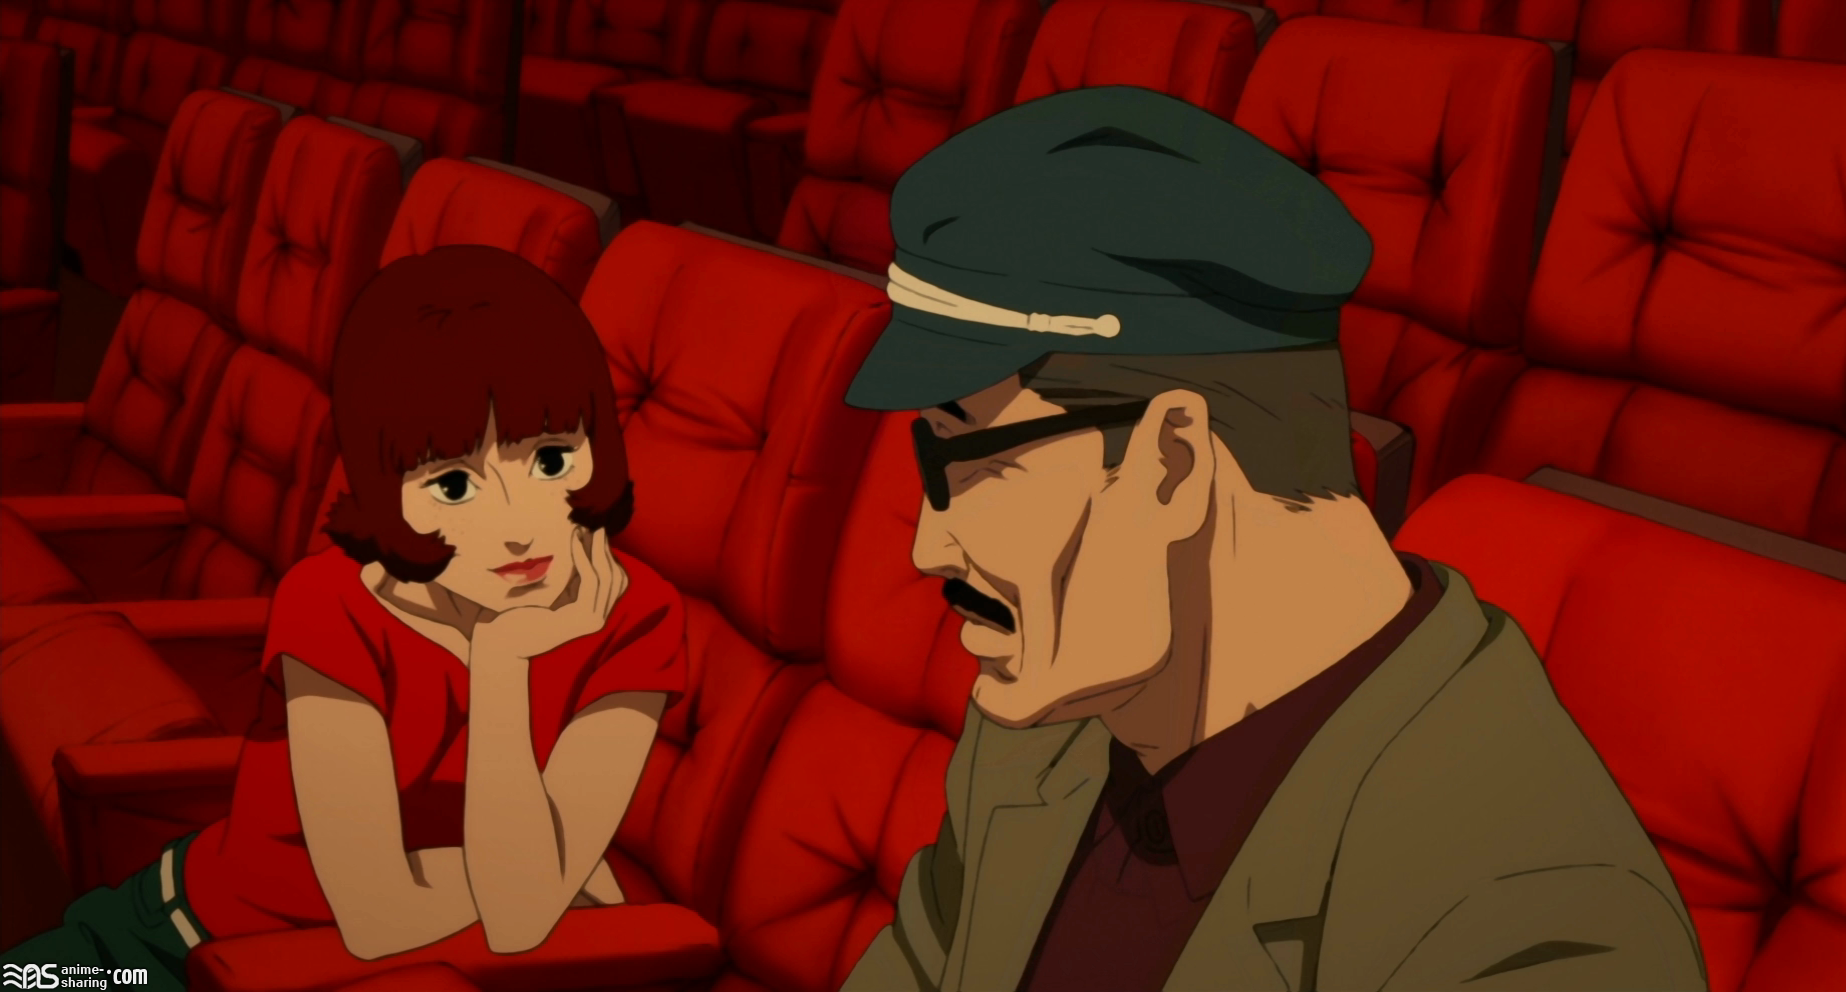 Paprika 3xR Blu-ray.1080p.H264.FLAC BA6823C6.mkv_004430.126_1.png. and has ...